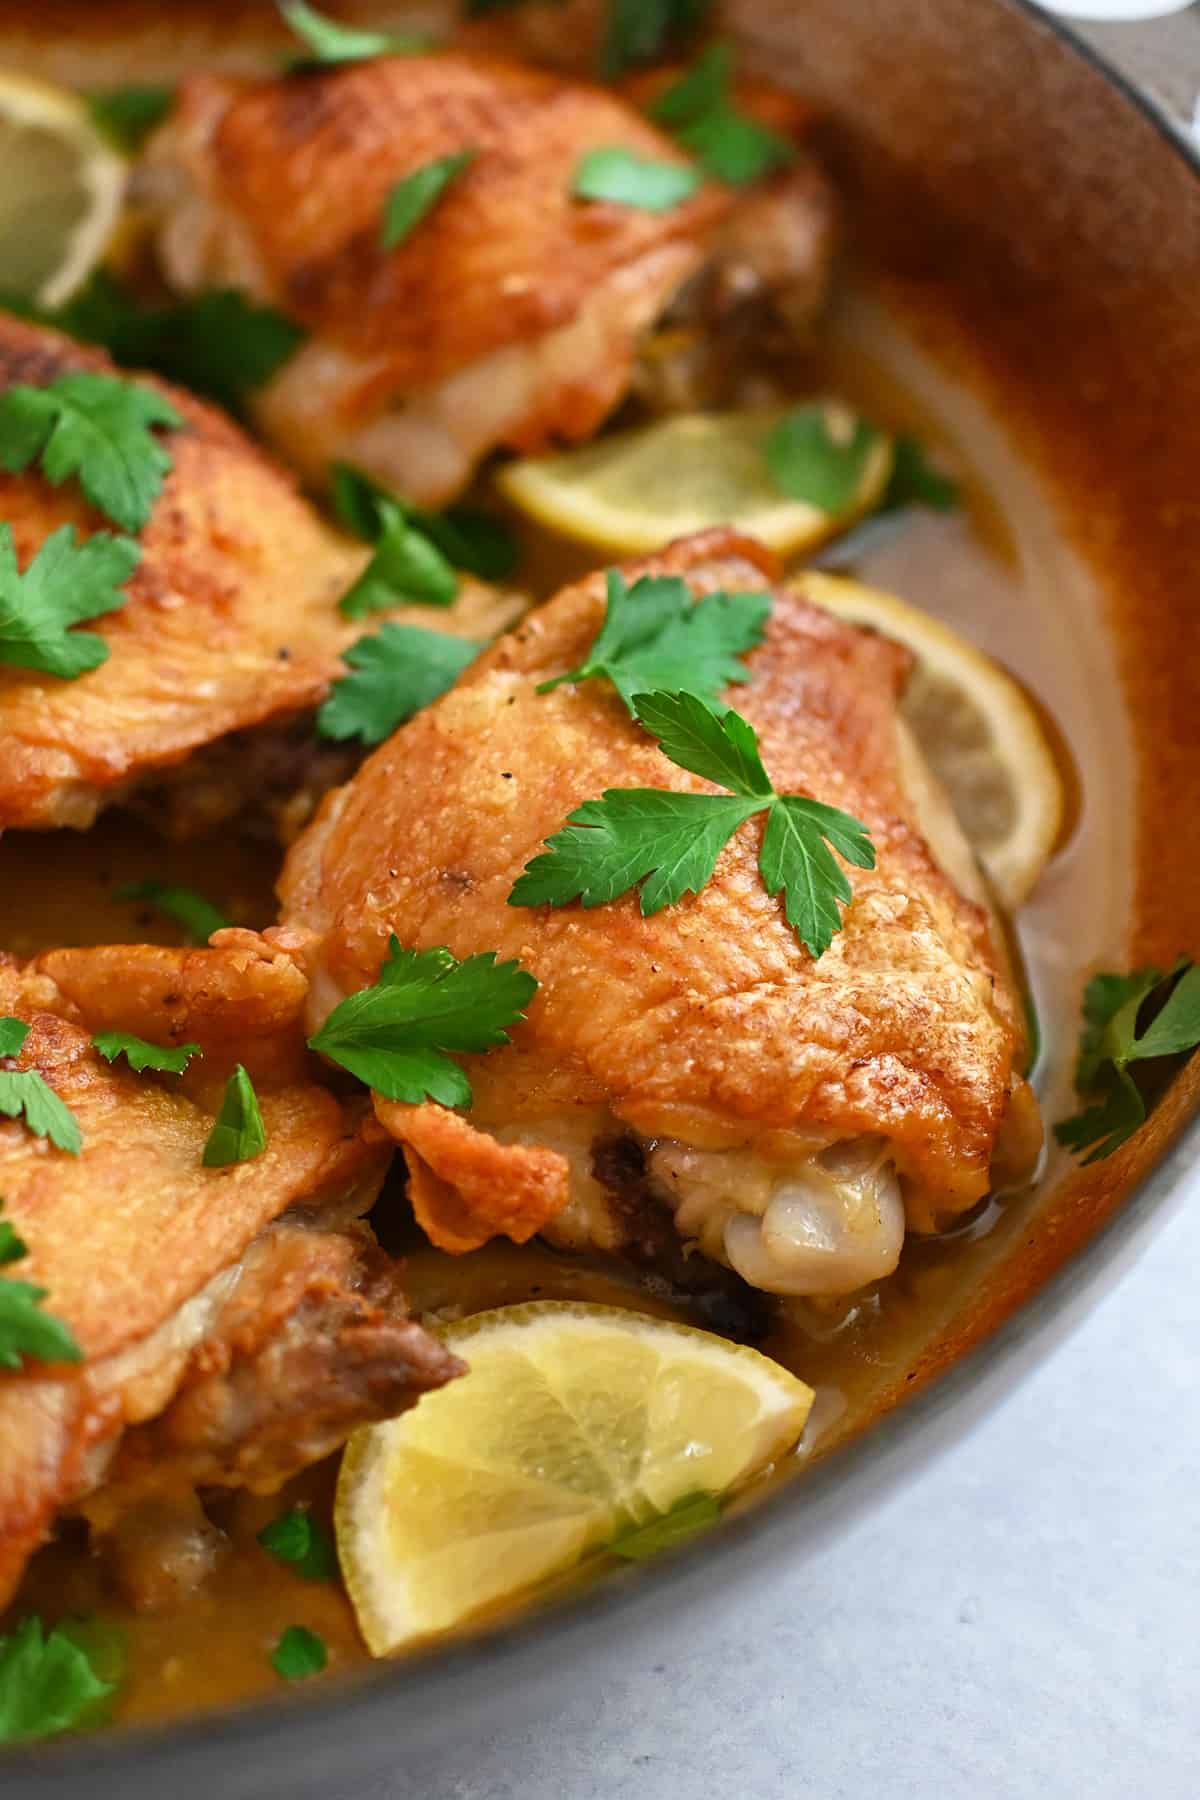 A closeup view of lemon garlic chicken thighs in a skillet with golden brown skin.